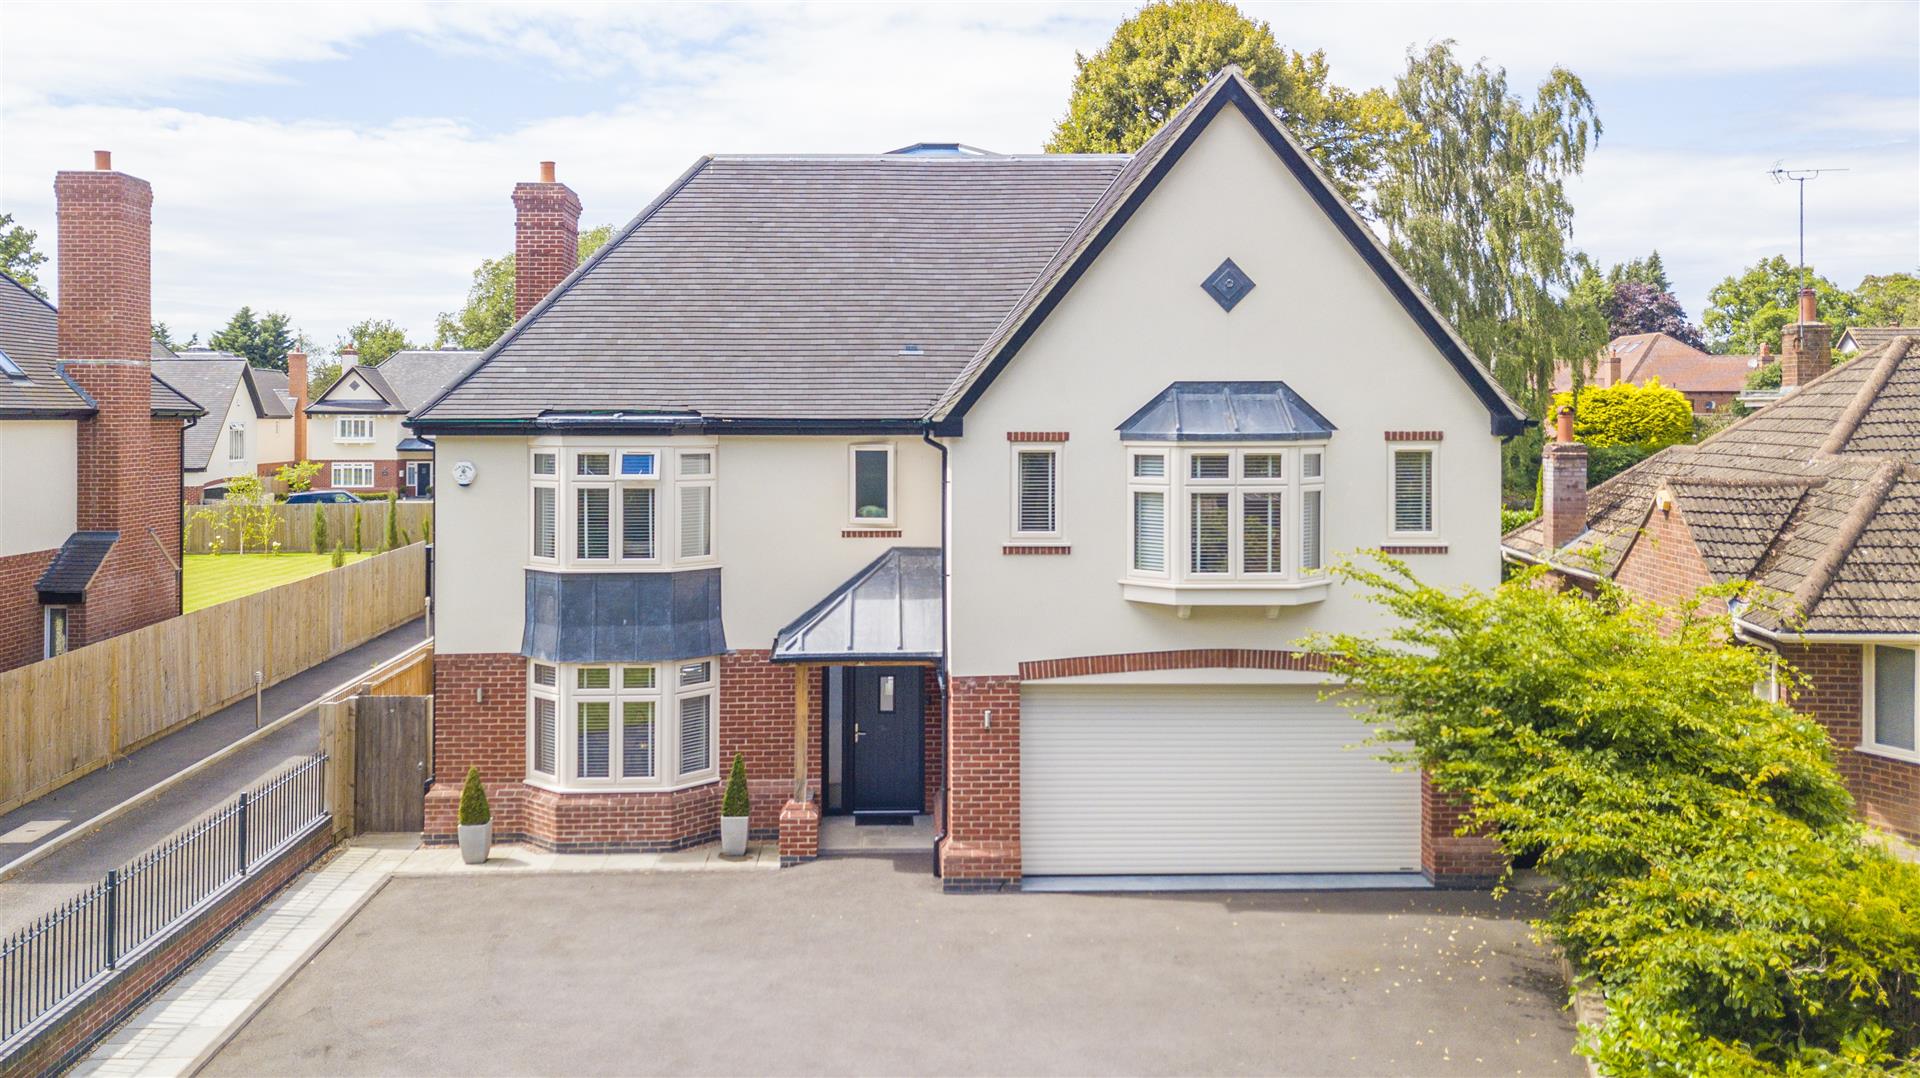 5 bed detached house for sale in Alderbrook Road, Solihull  - Property Image 1